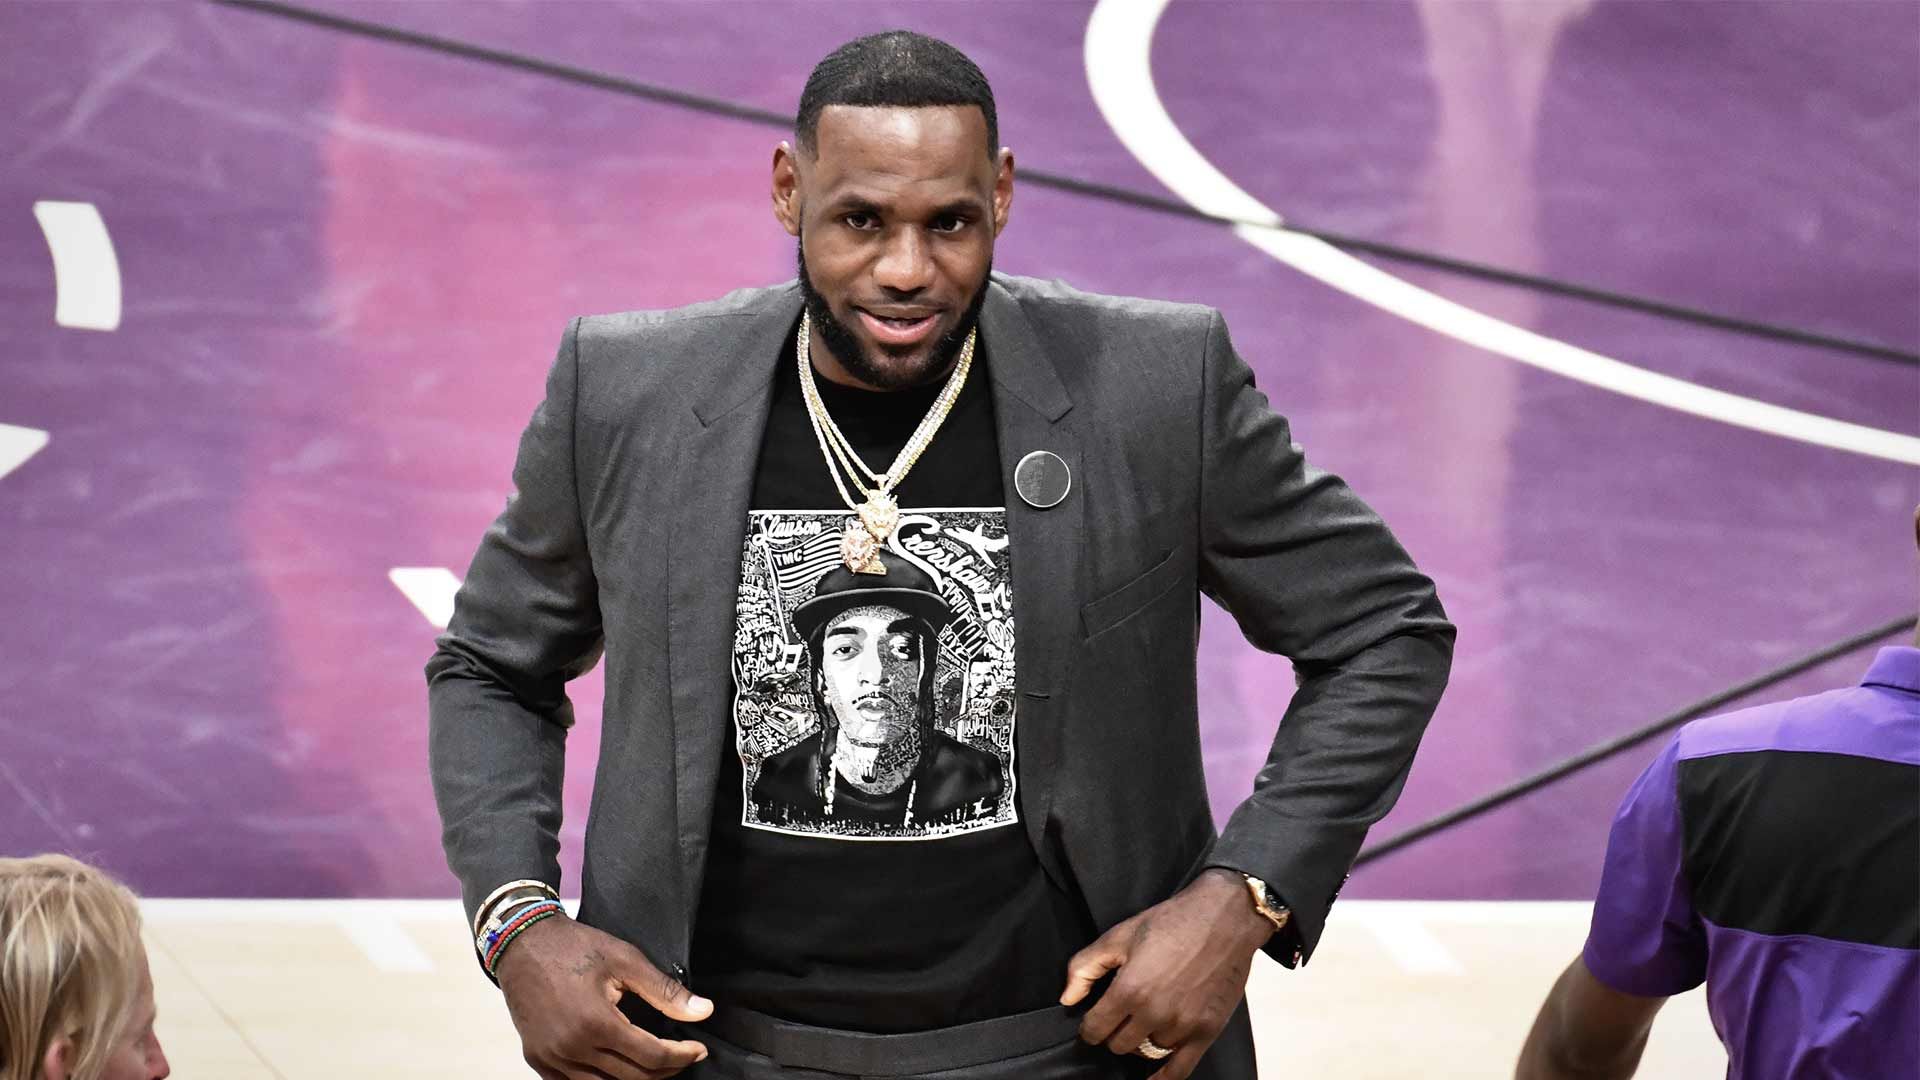 LeBron James and the Lakers Pay Tribute 